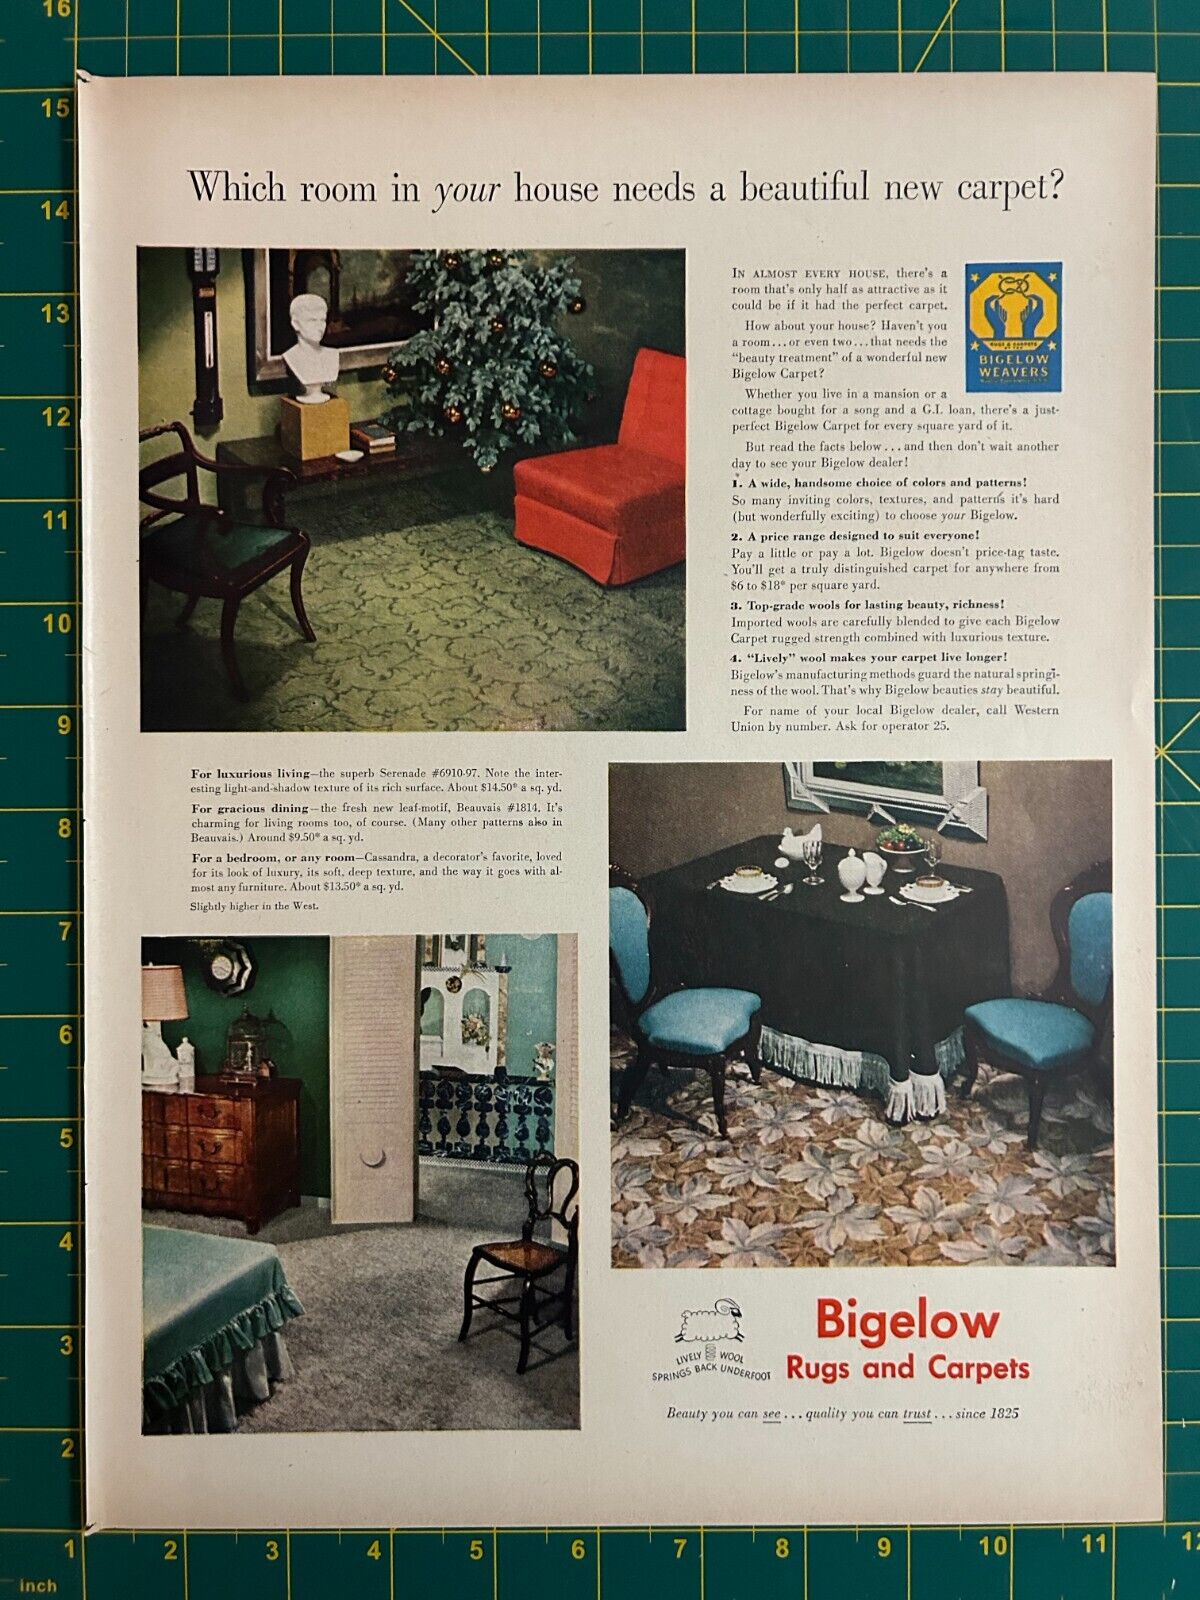 1948 Vintage Bigelow Rugs And Carpets Wool Since 1825 1940's Rooms Print Ad O1